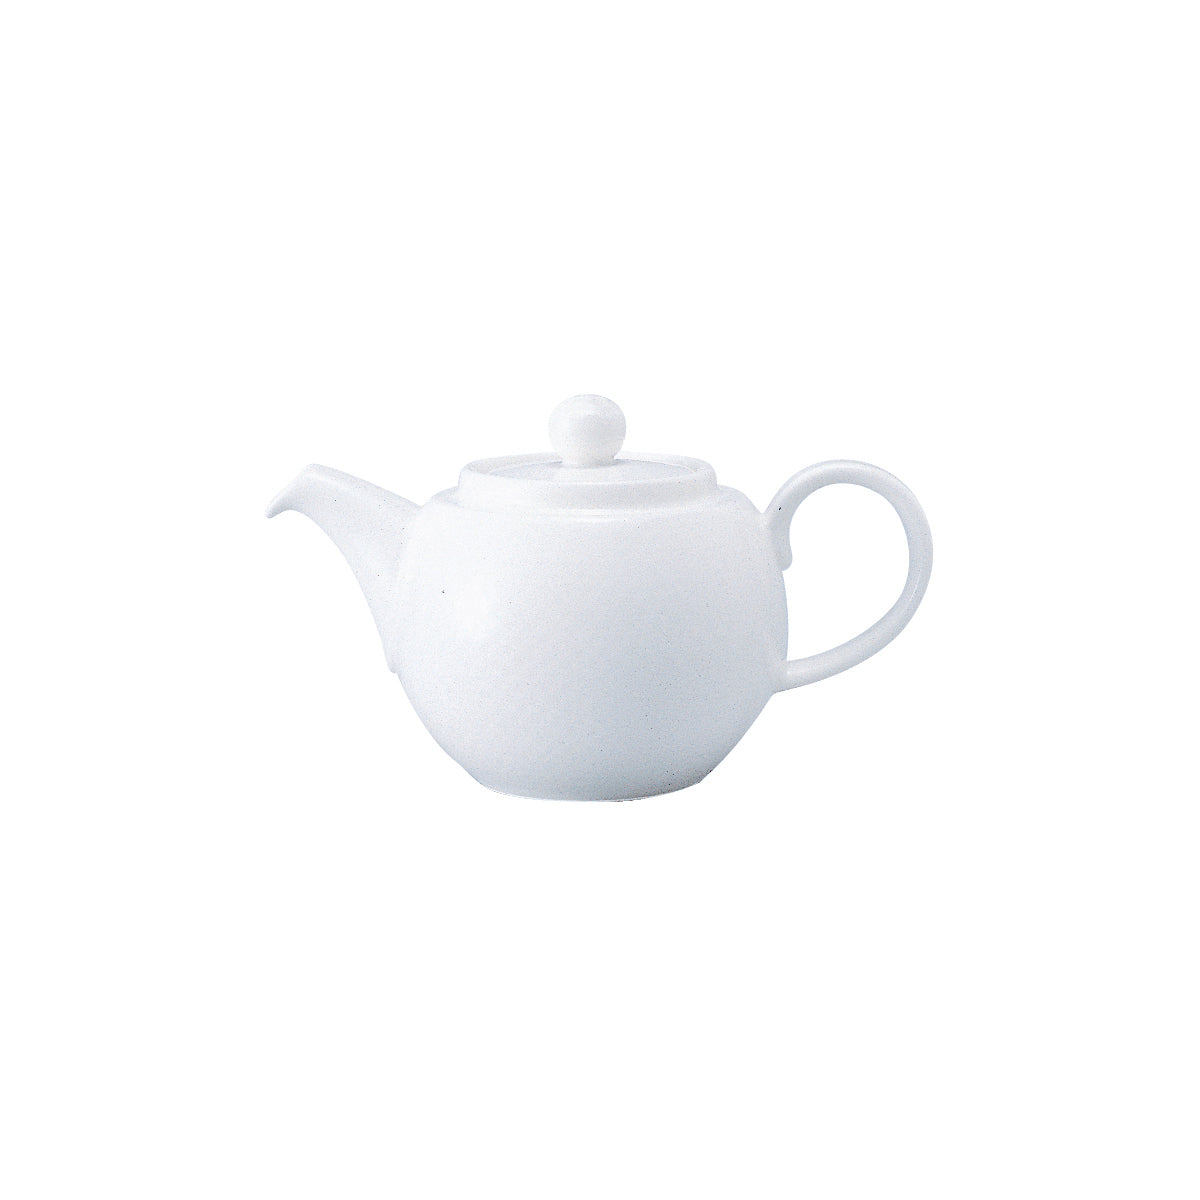 VB16-2155-0530 Villeroy And Boch Villeroy And Boch Easy White Teapot No. 5 with Lid 400ml Tomkin Australia Hospitality Supplies